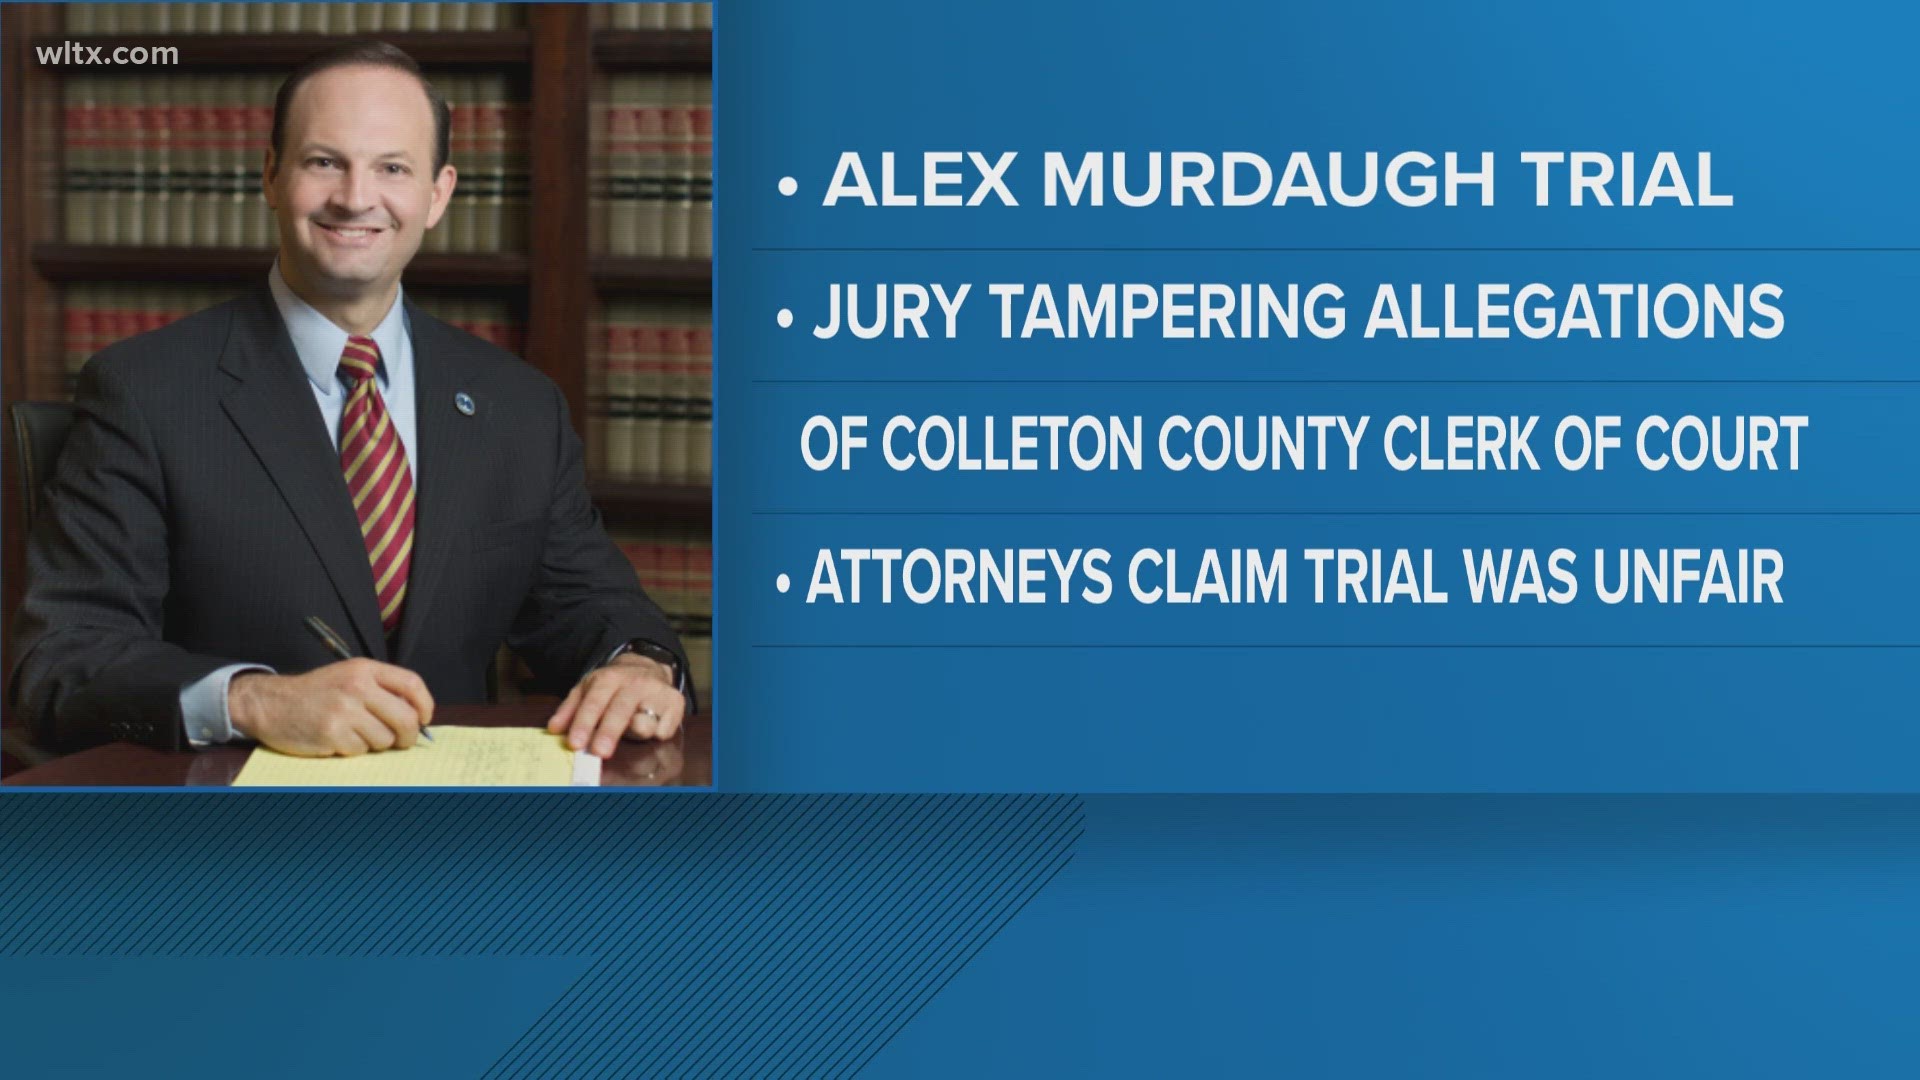 The SC Attorney General has asked that SLED look into questions about jury tampering in the Alex Murdaugh trial.